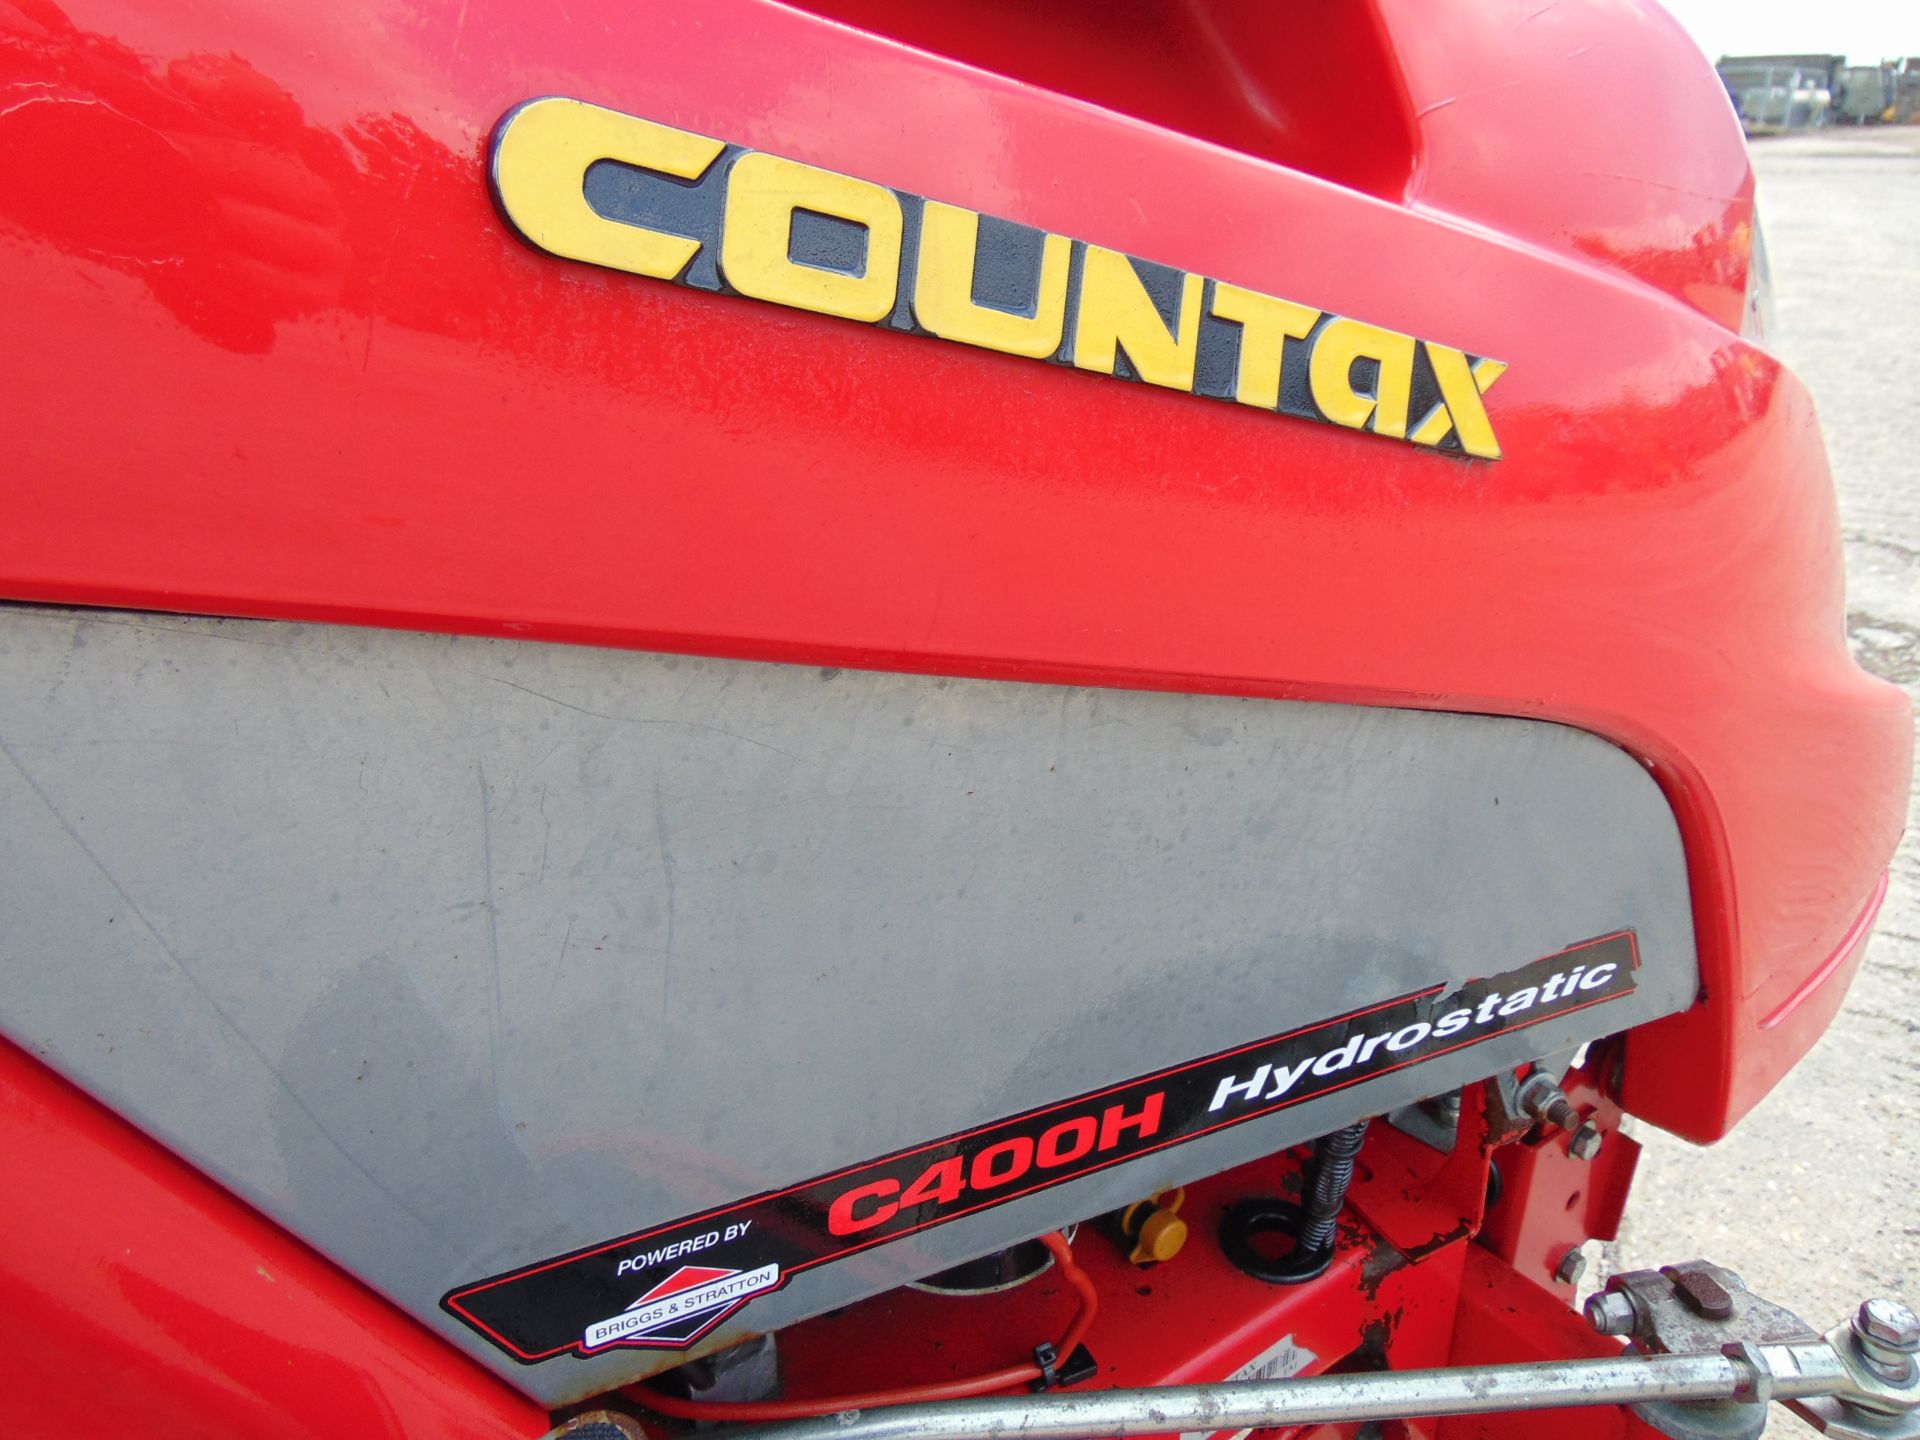 Countax C400H Ride On Mower / Lawn Tractor - Image 10 of 13